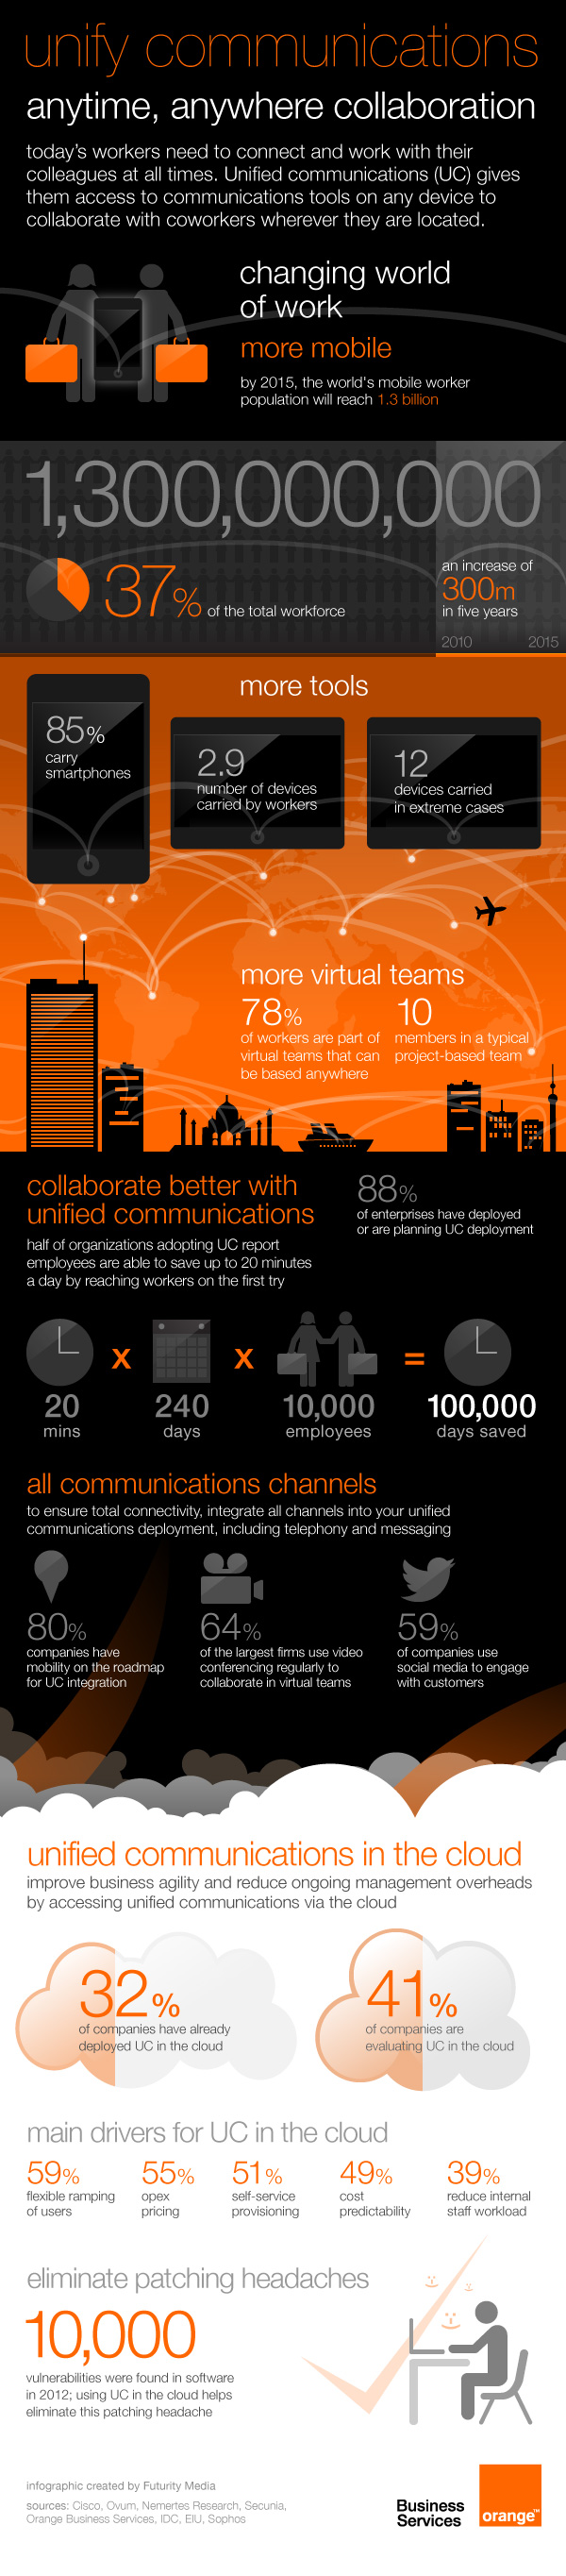 unified communications infographic